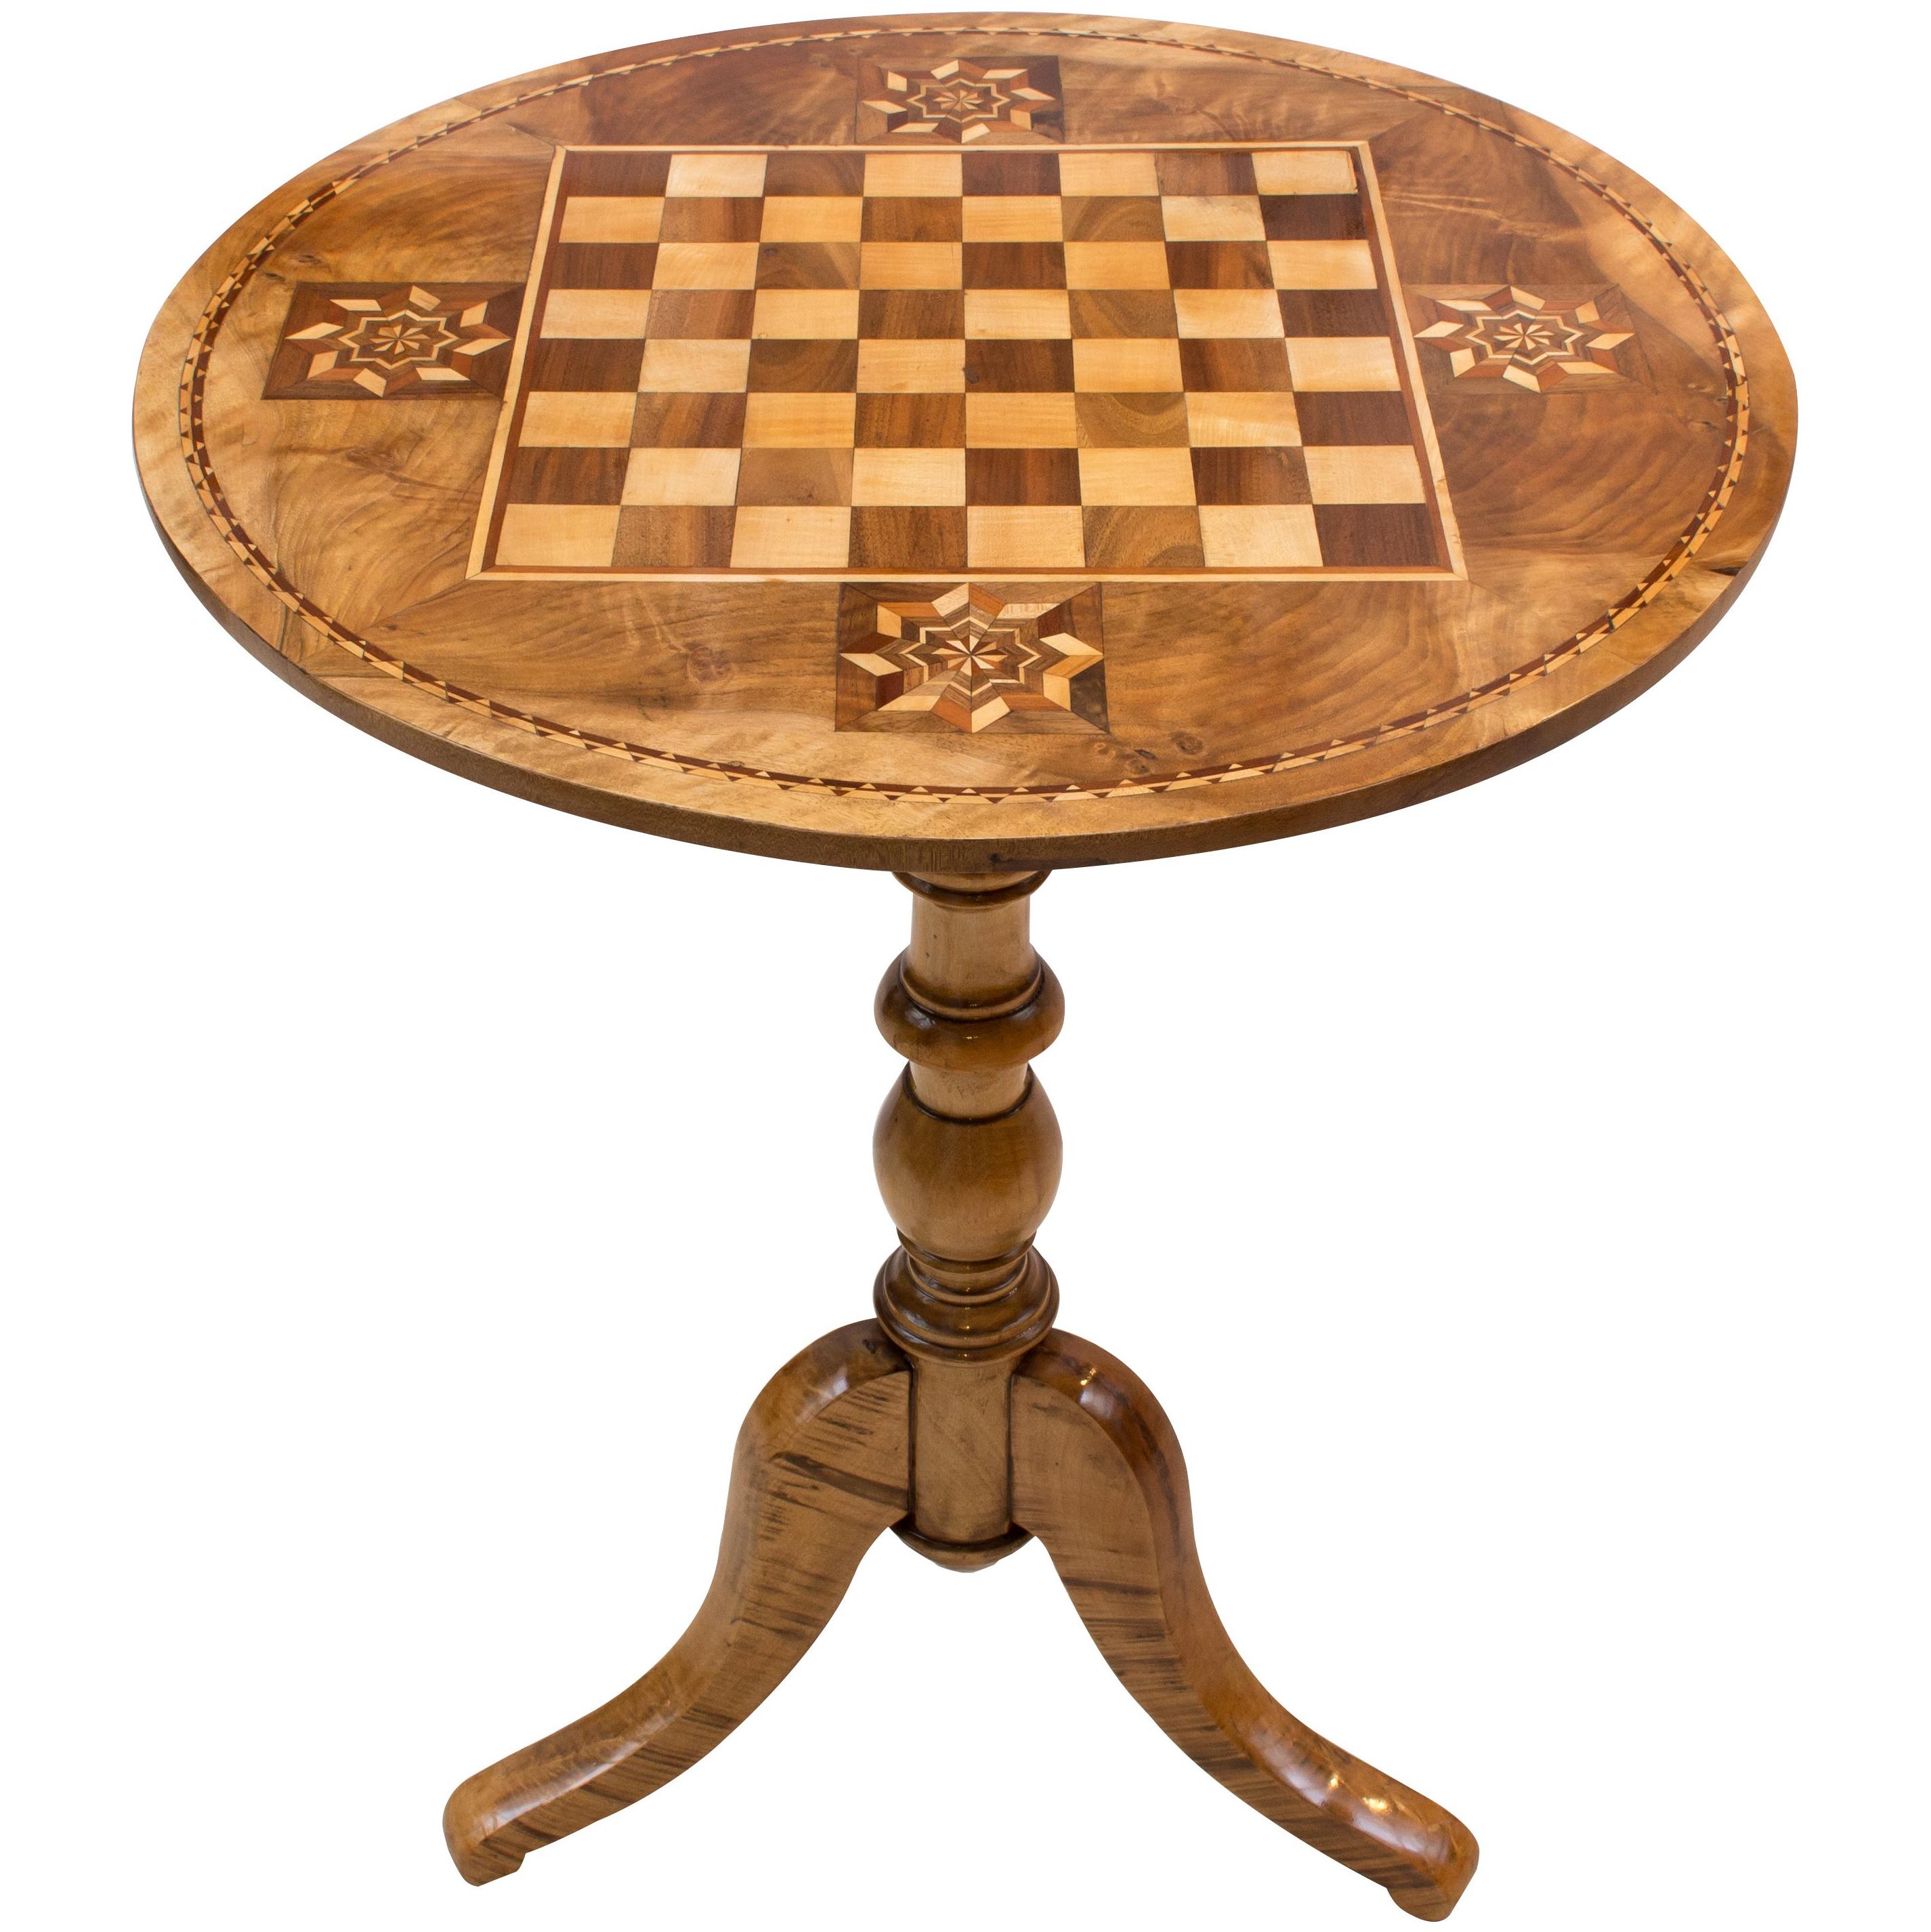 19th Century Biedermeier Marquetry Chess or Side Table